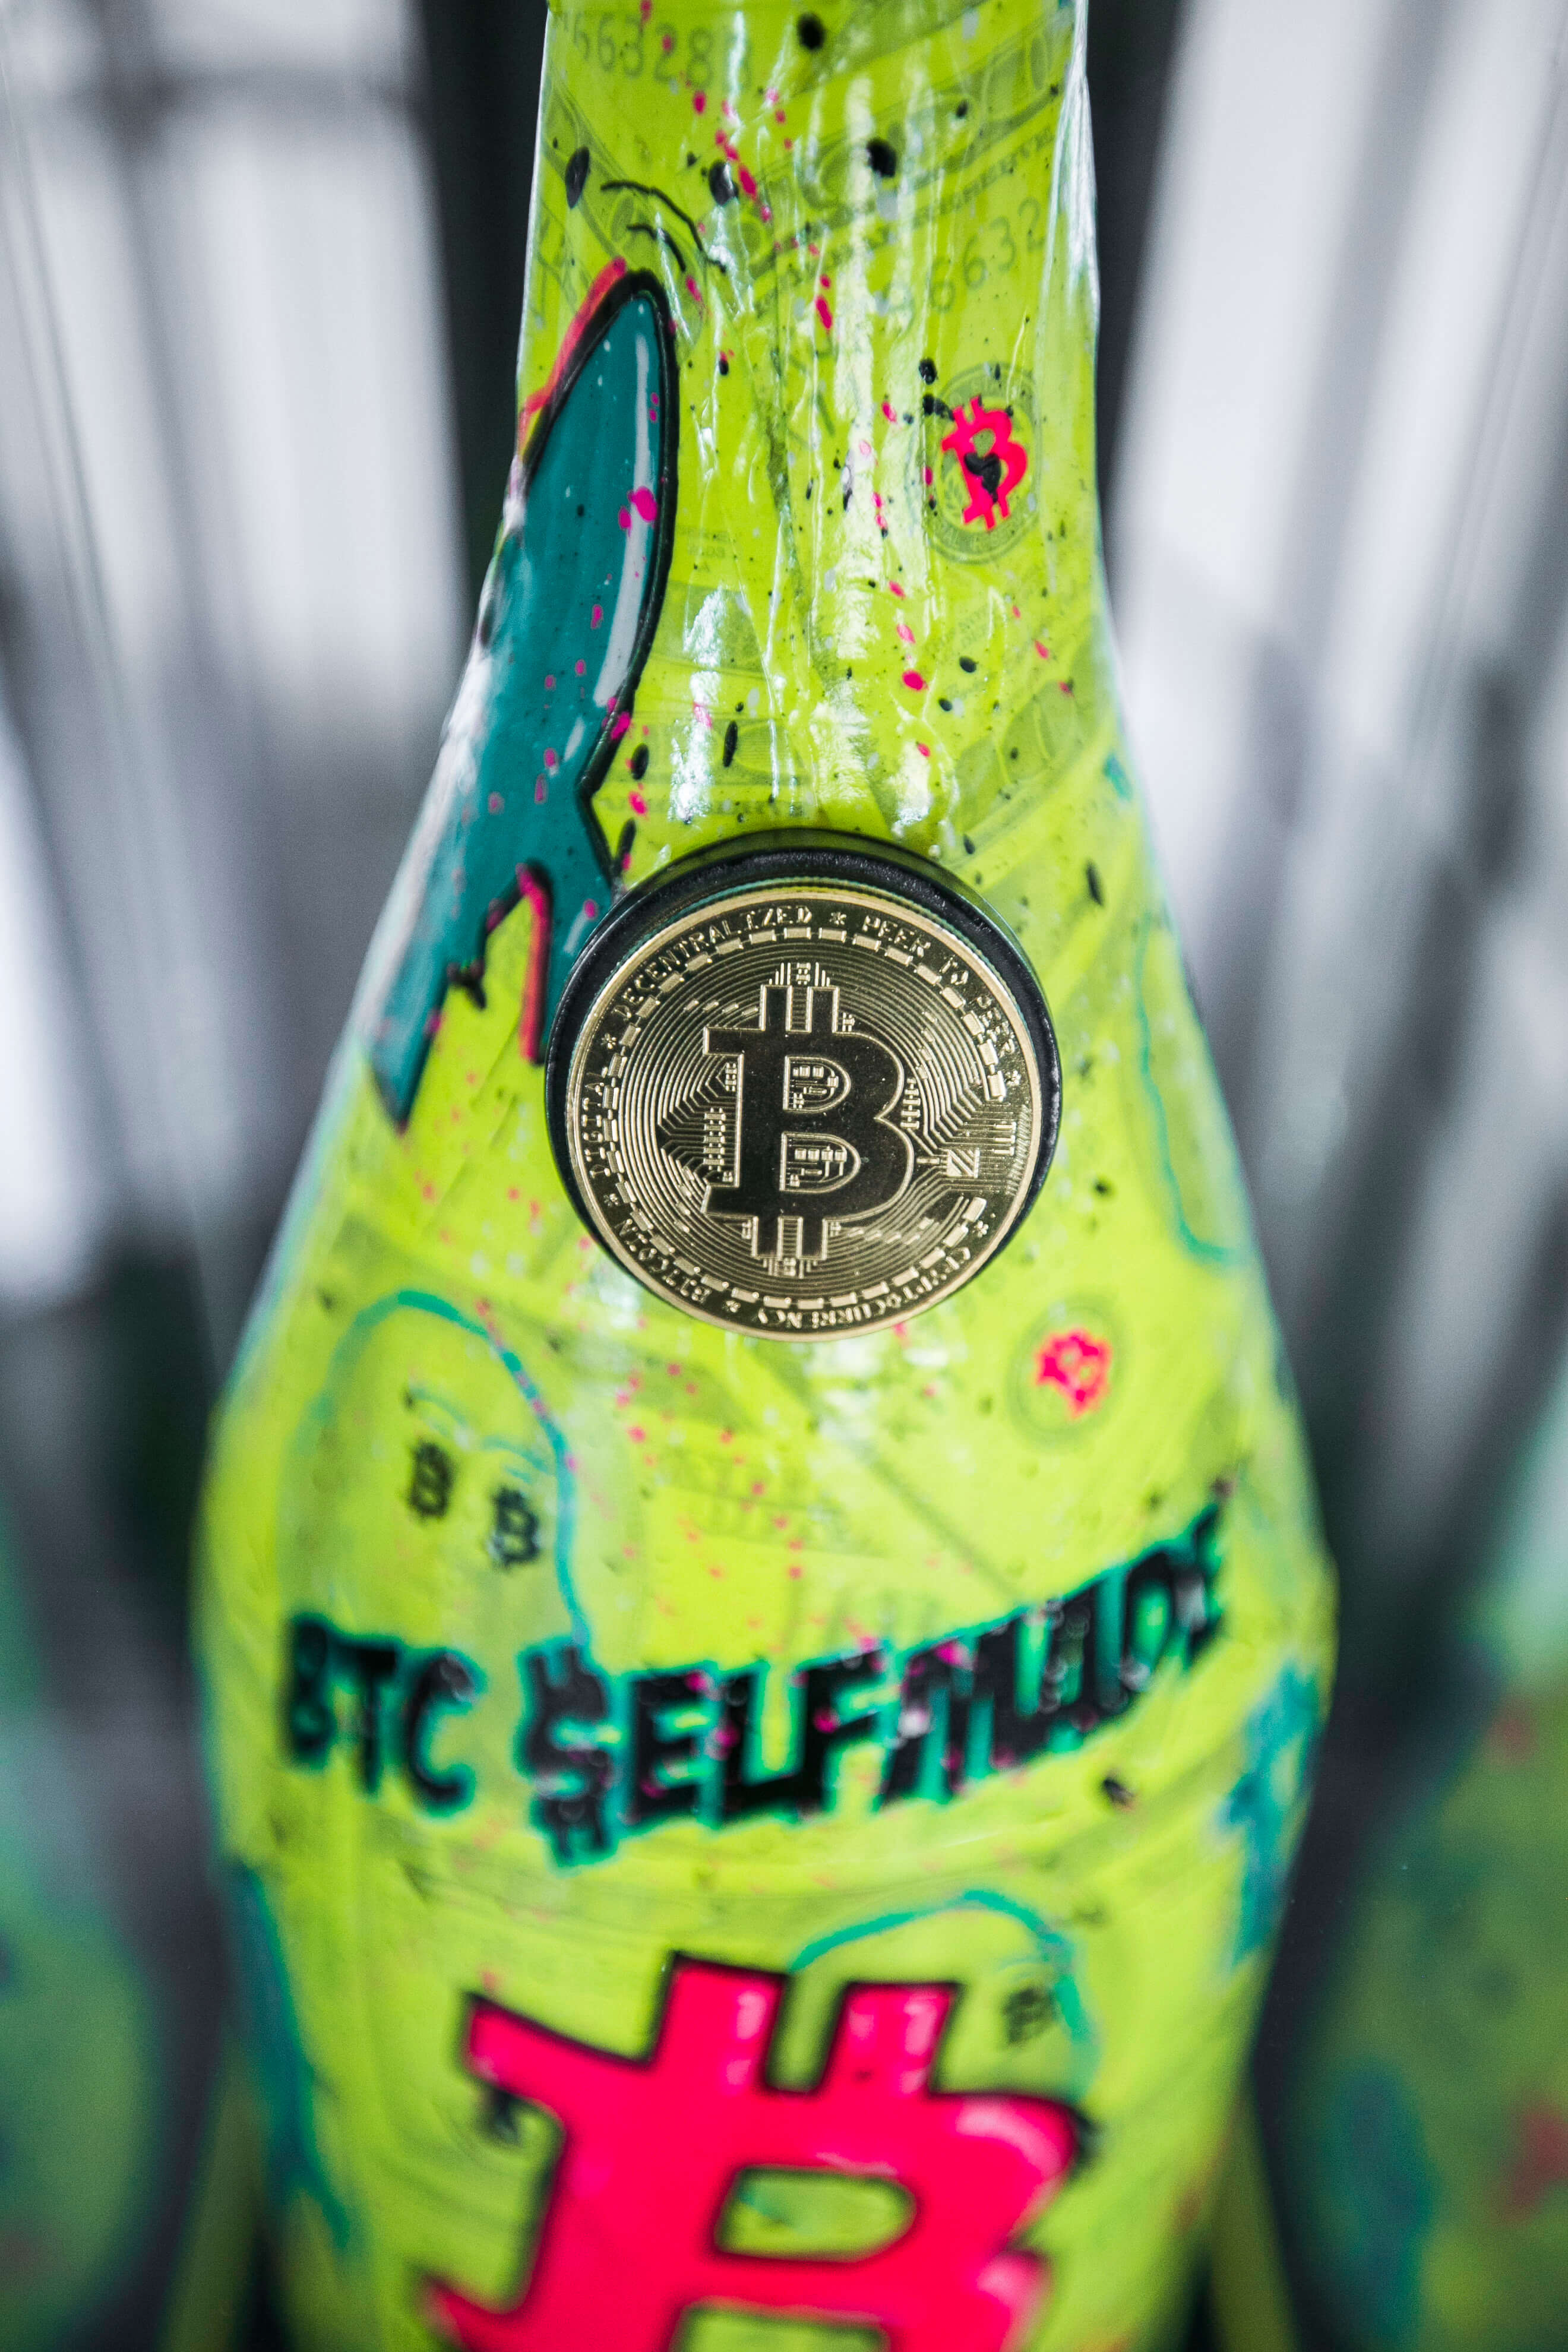 XXL Bitcoin Bottle &quot;Selfmade&quot;